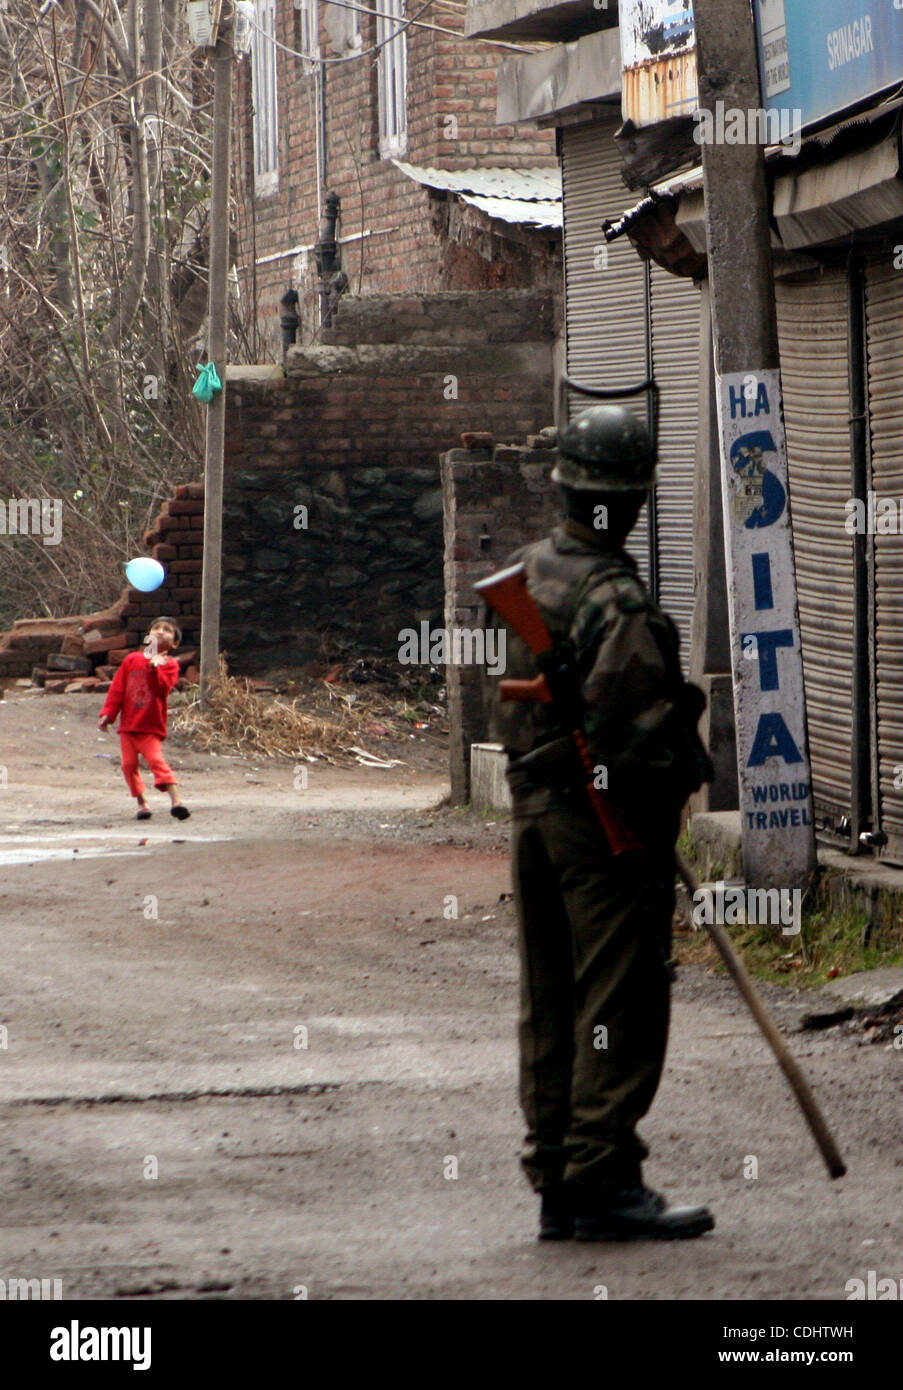 Feb 11, 2011 - Srinagar, Kashmir, India - A Kashmiri boy playing as an Indian Central Reserve Police Force (CRPF) soldiers stand guard during a one day strike to mark the 27th death anniversary of Jammu and Kashmir Libration Front (JKLF) founder Maqbool Bhat in Srinagar the summer capital of Indian  Stock Photo